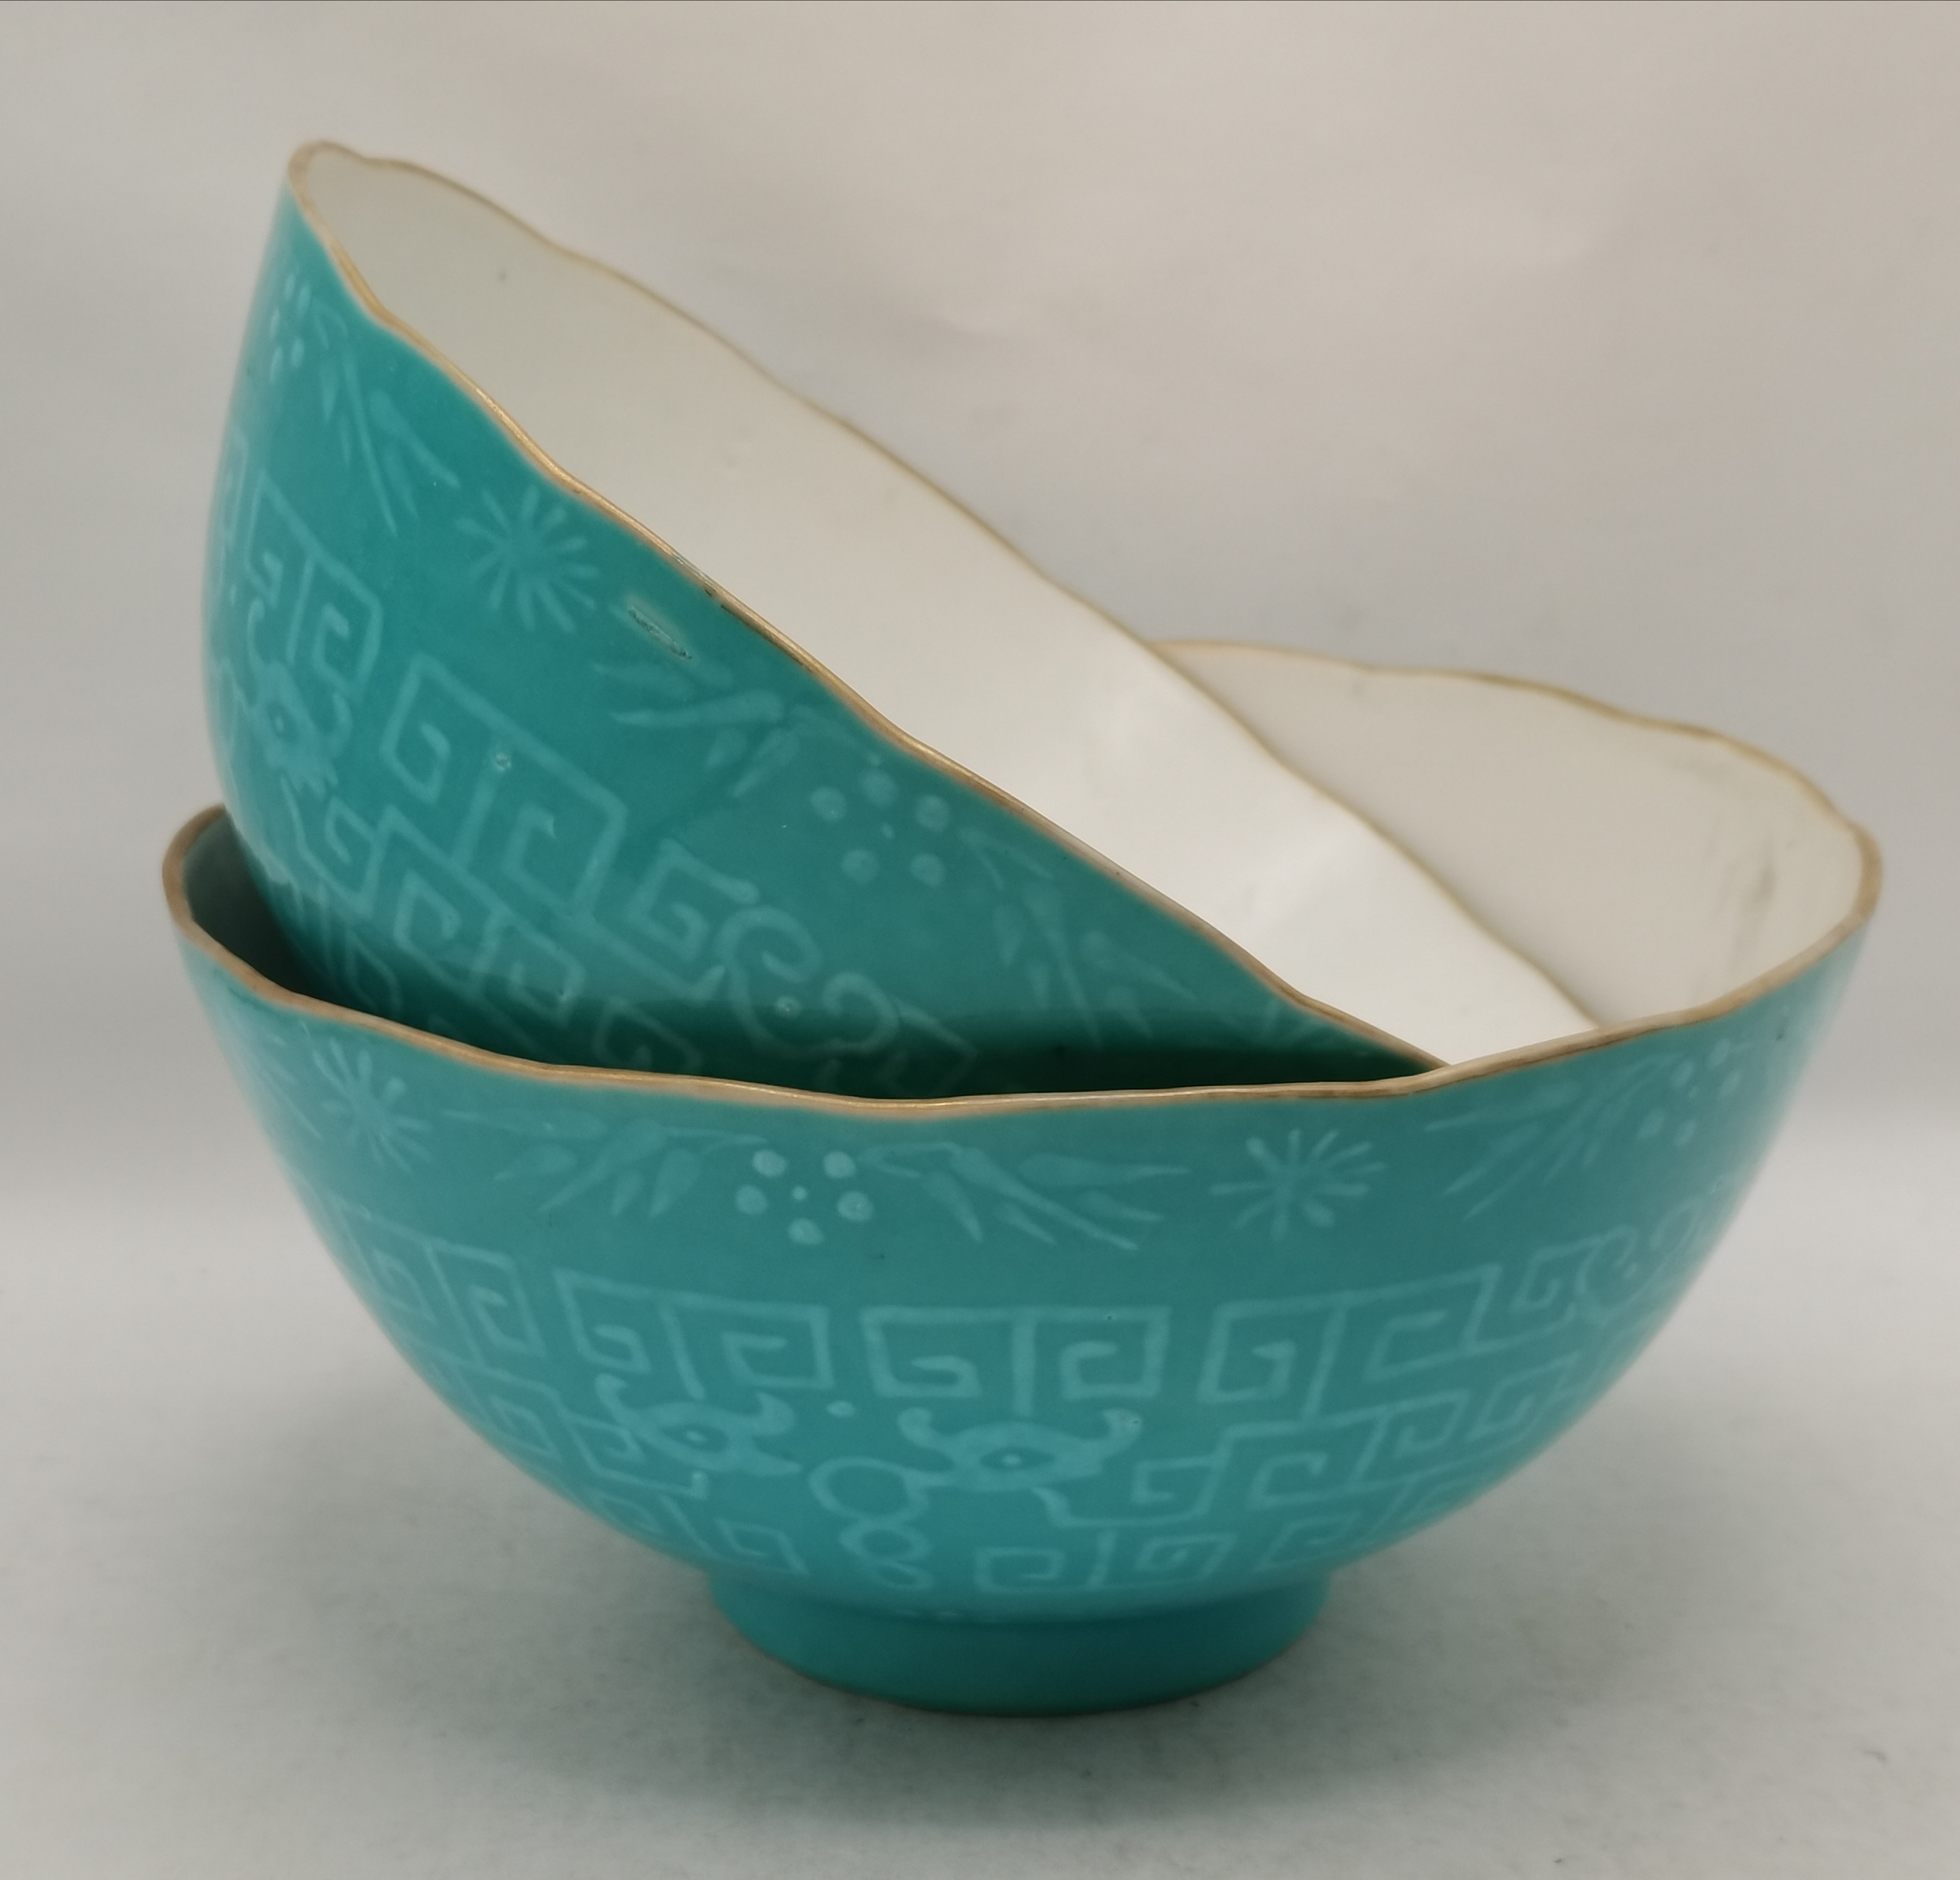 Pair of Chinese Porcelain Turquoise bowls, character marks under